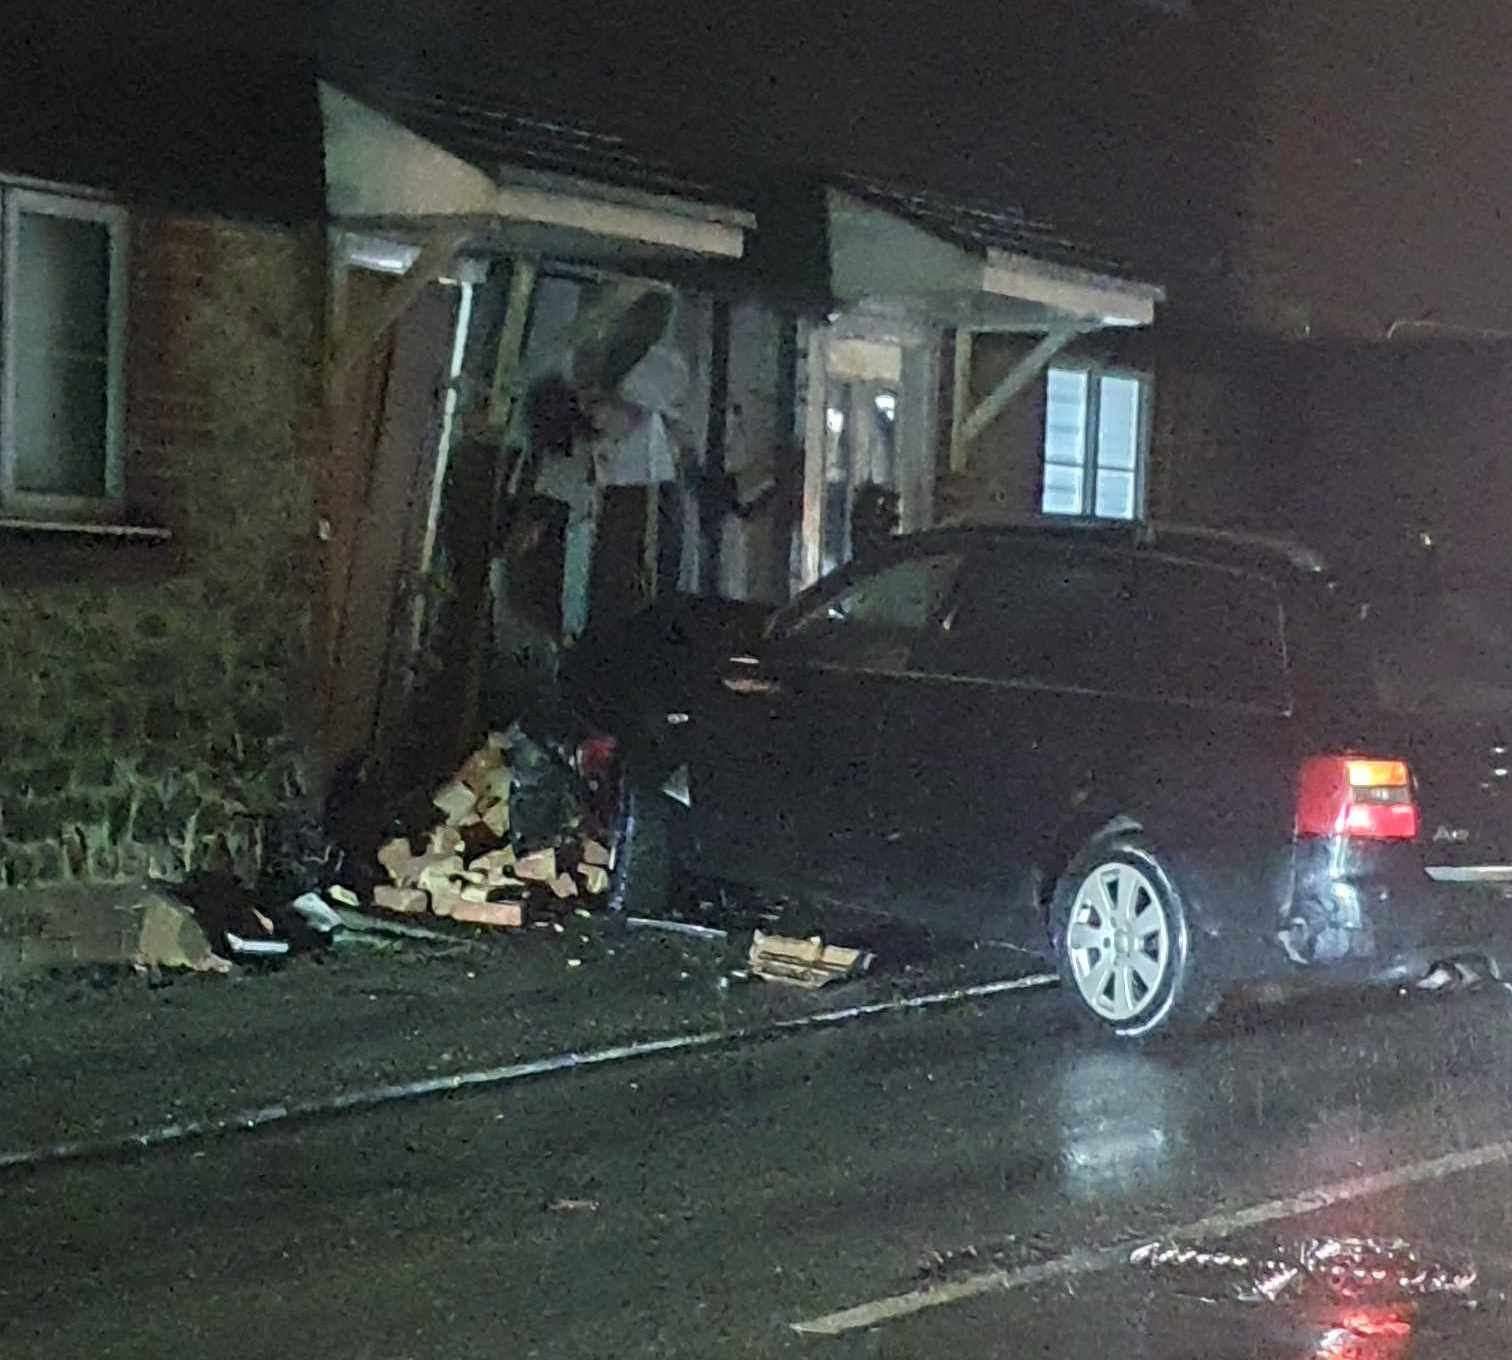 Mamsonguina Ebuka lost control of her Audi A6 and hit a house in Farleigh Hill, Maidstone. Picture: Elizabeth Mckirdy